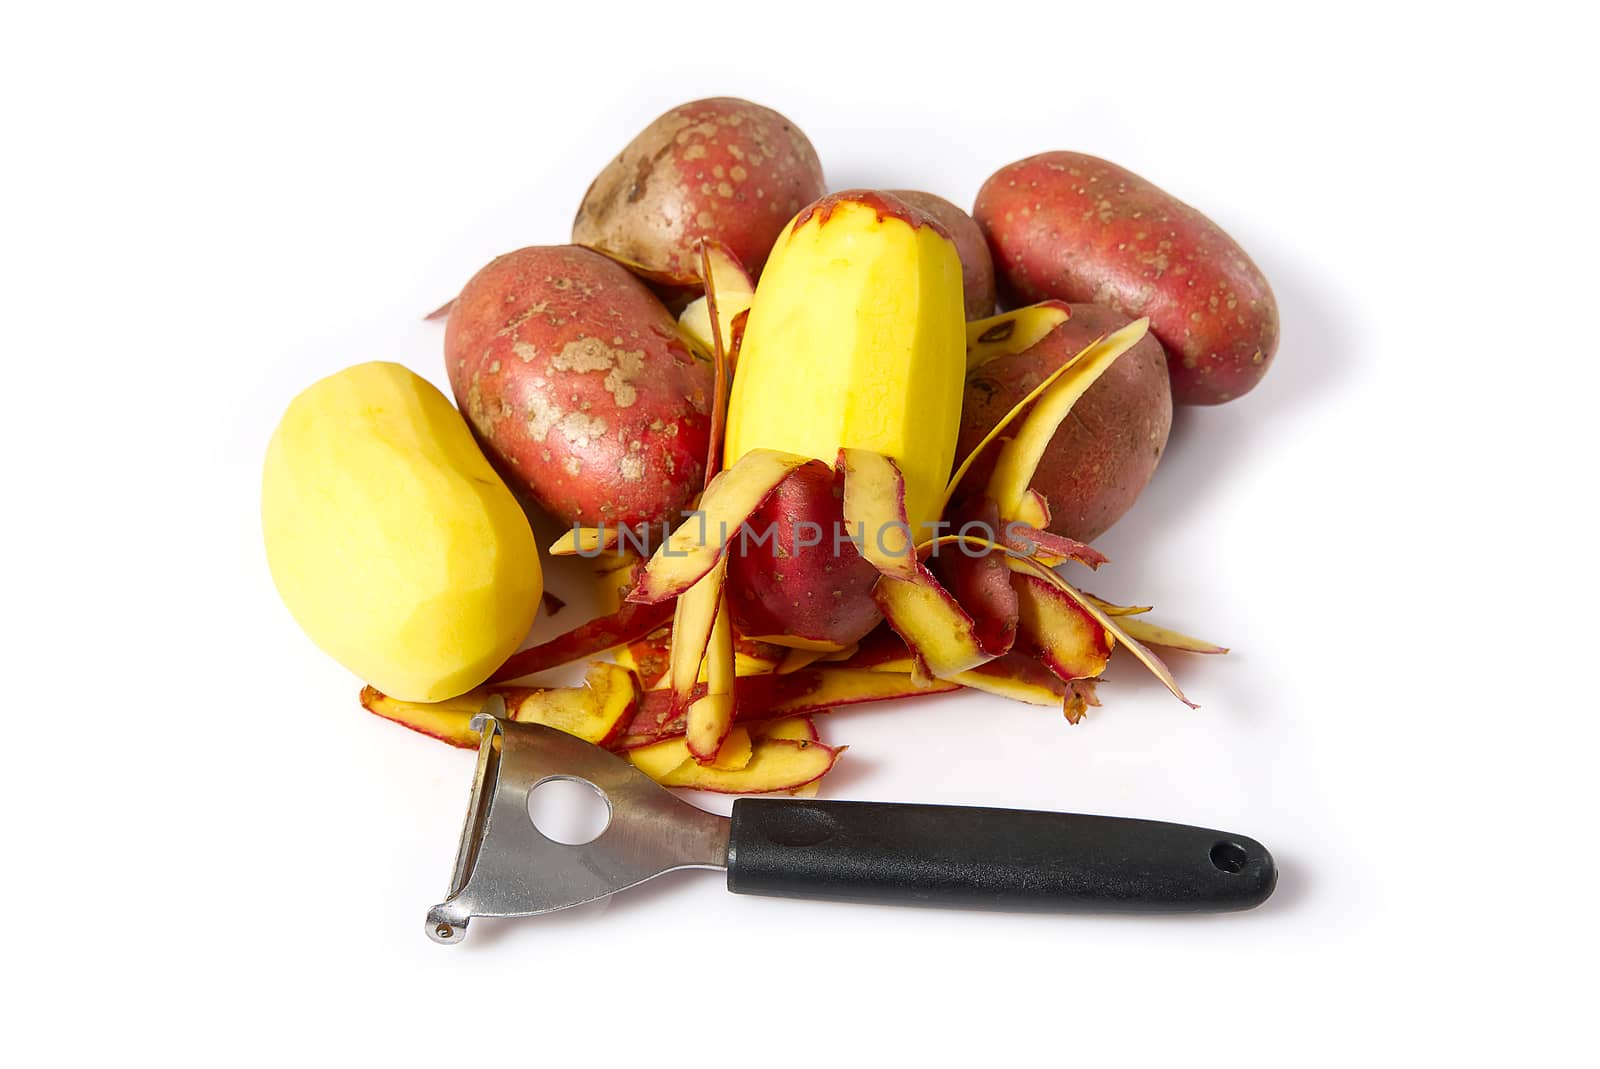 a pile of unpeeled potatoes and black potatoes peeling, white background, object isolated. potato and peeler by PhotoTime